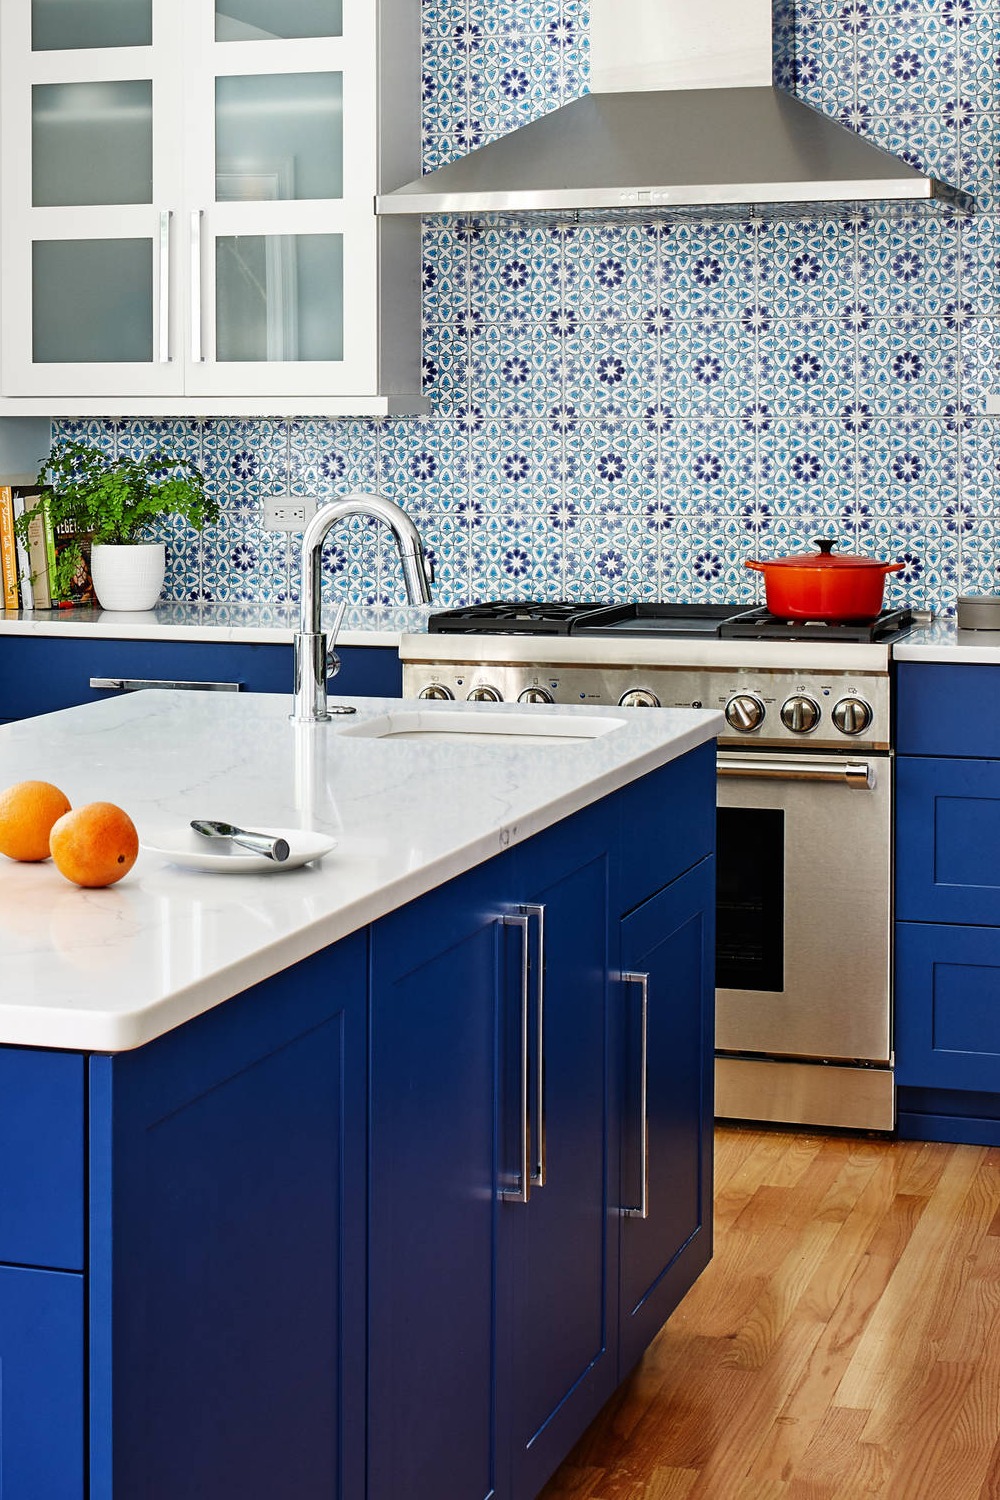 Blue Shaker Kitchen Cabinets Base Cabinet Navy Blue Shaker Kitchen Cabinets H X Door W X Corner Wall Frame Plywood Sink